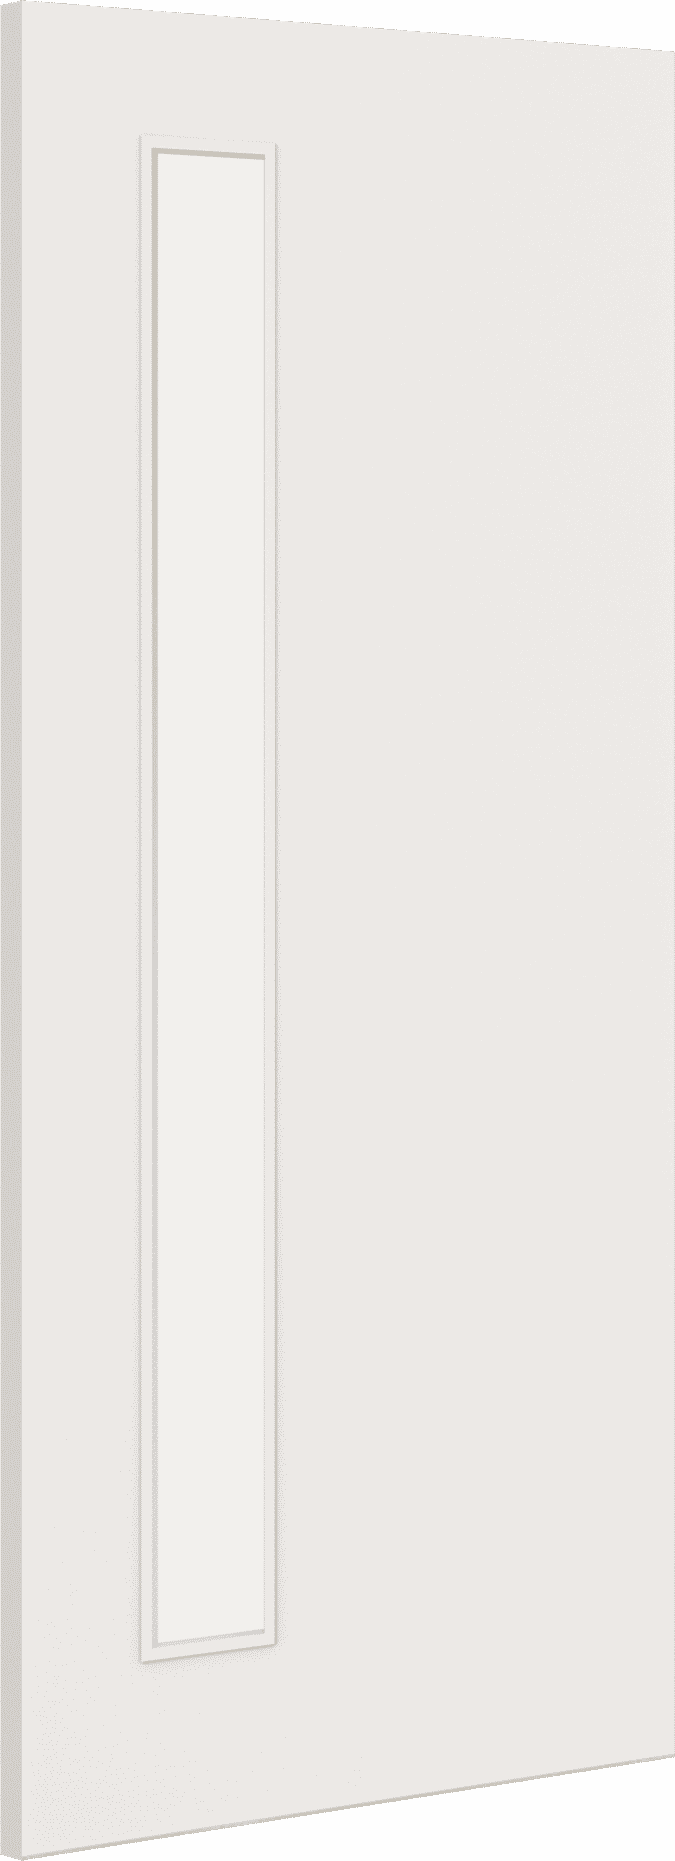 2040mm x 626mm x 44mm Architectural Paint Grade White 06 Clear Glazed Fire Door Blank